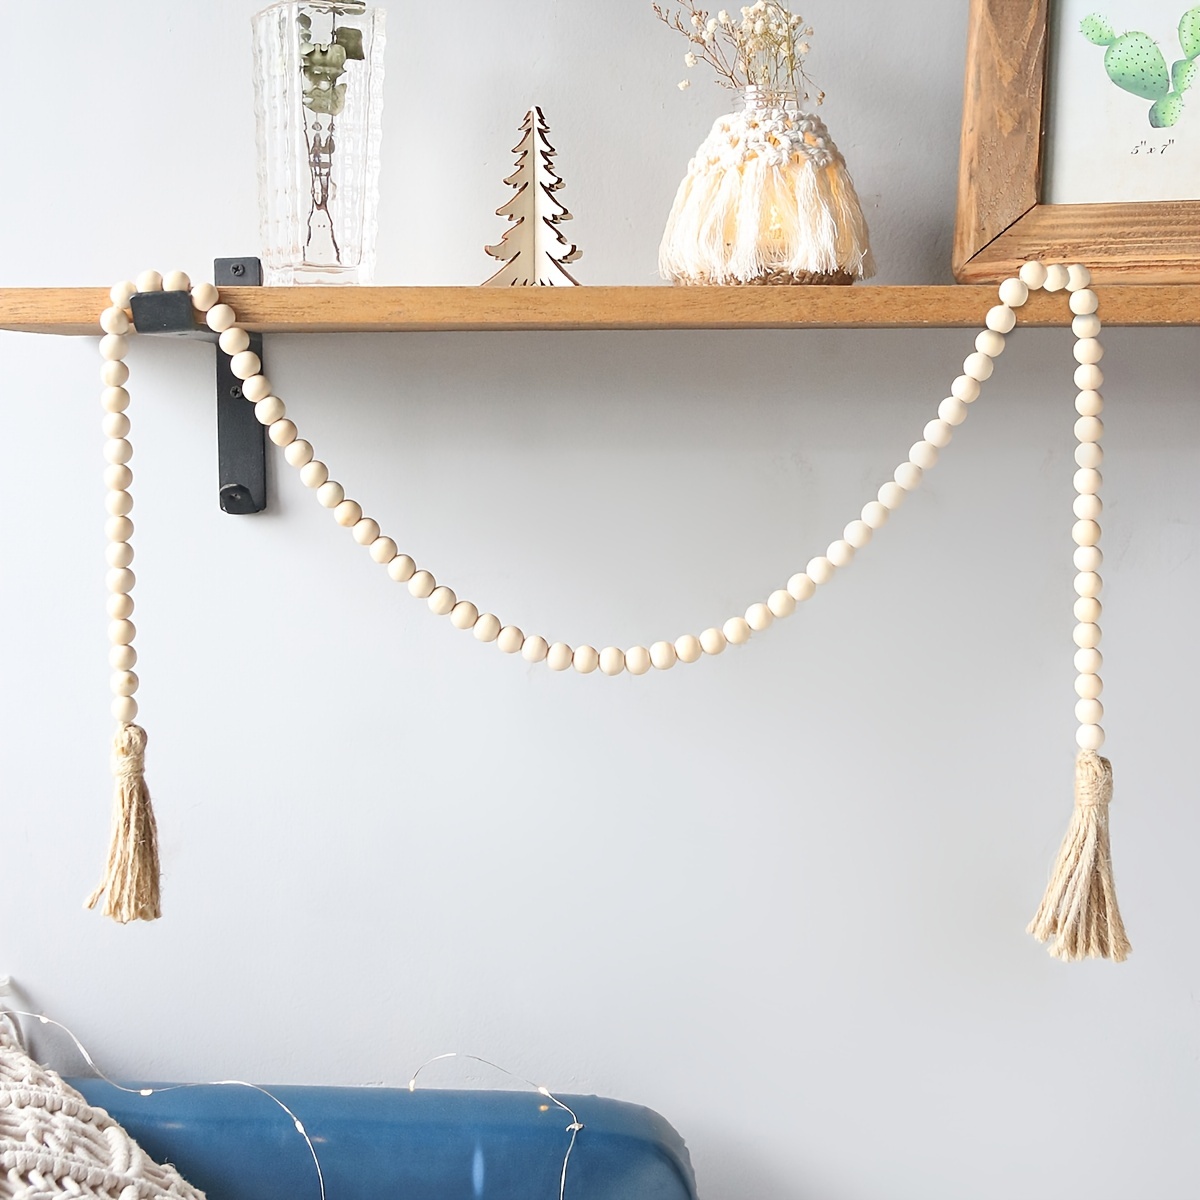 How To Make Wood Bead Wall Hanging Online